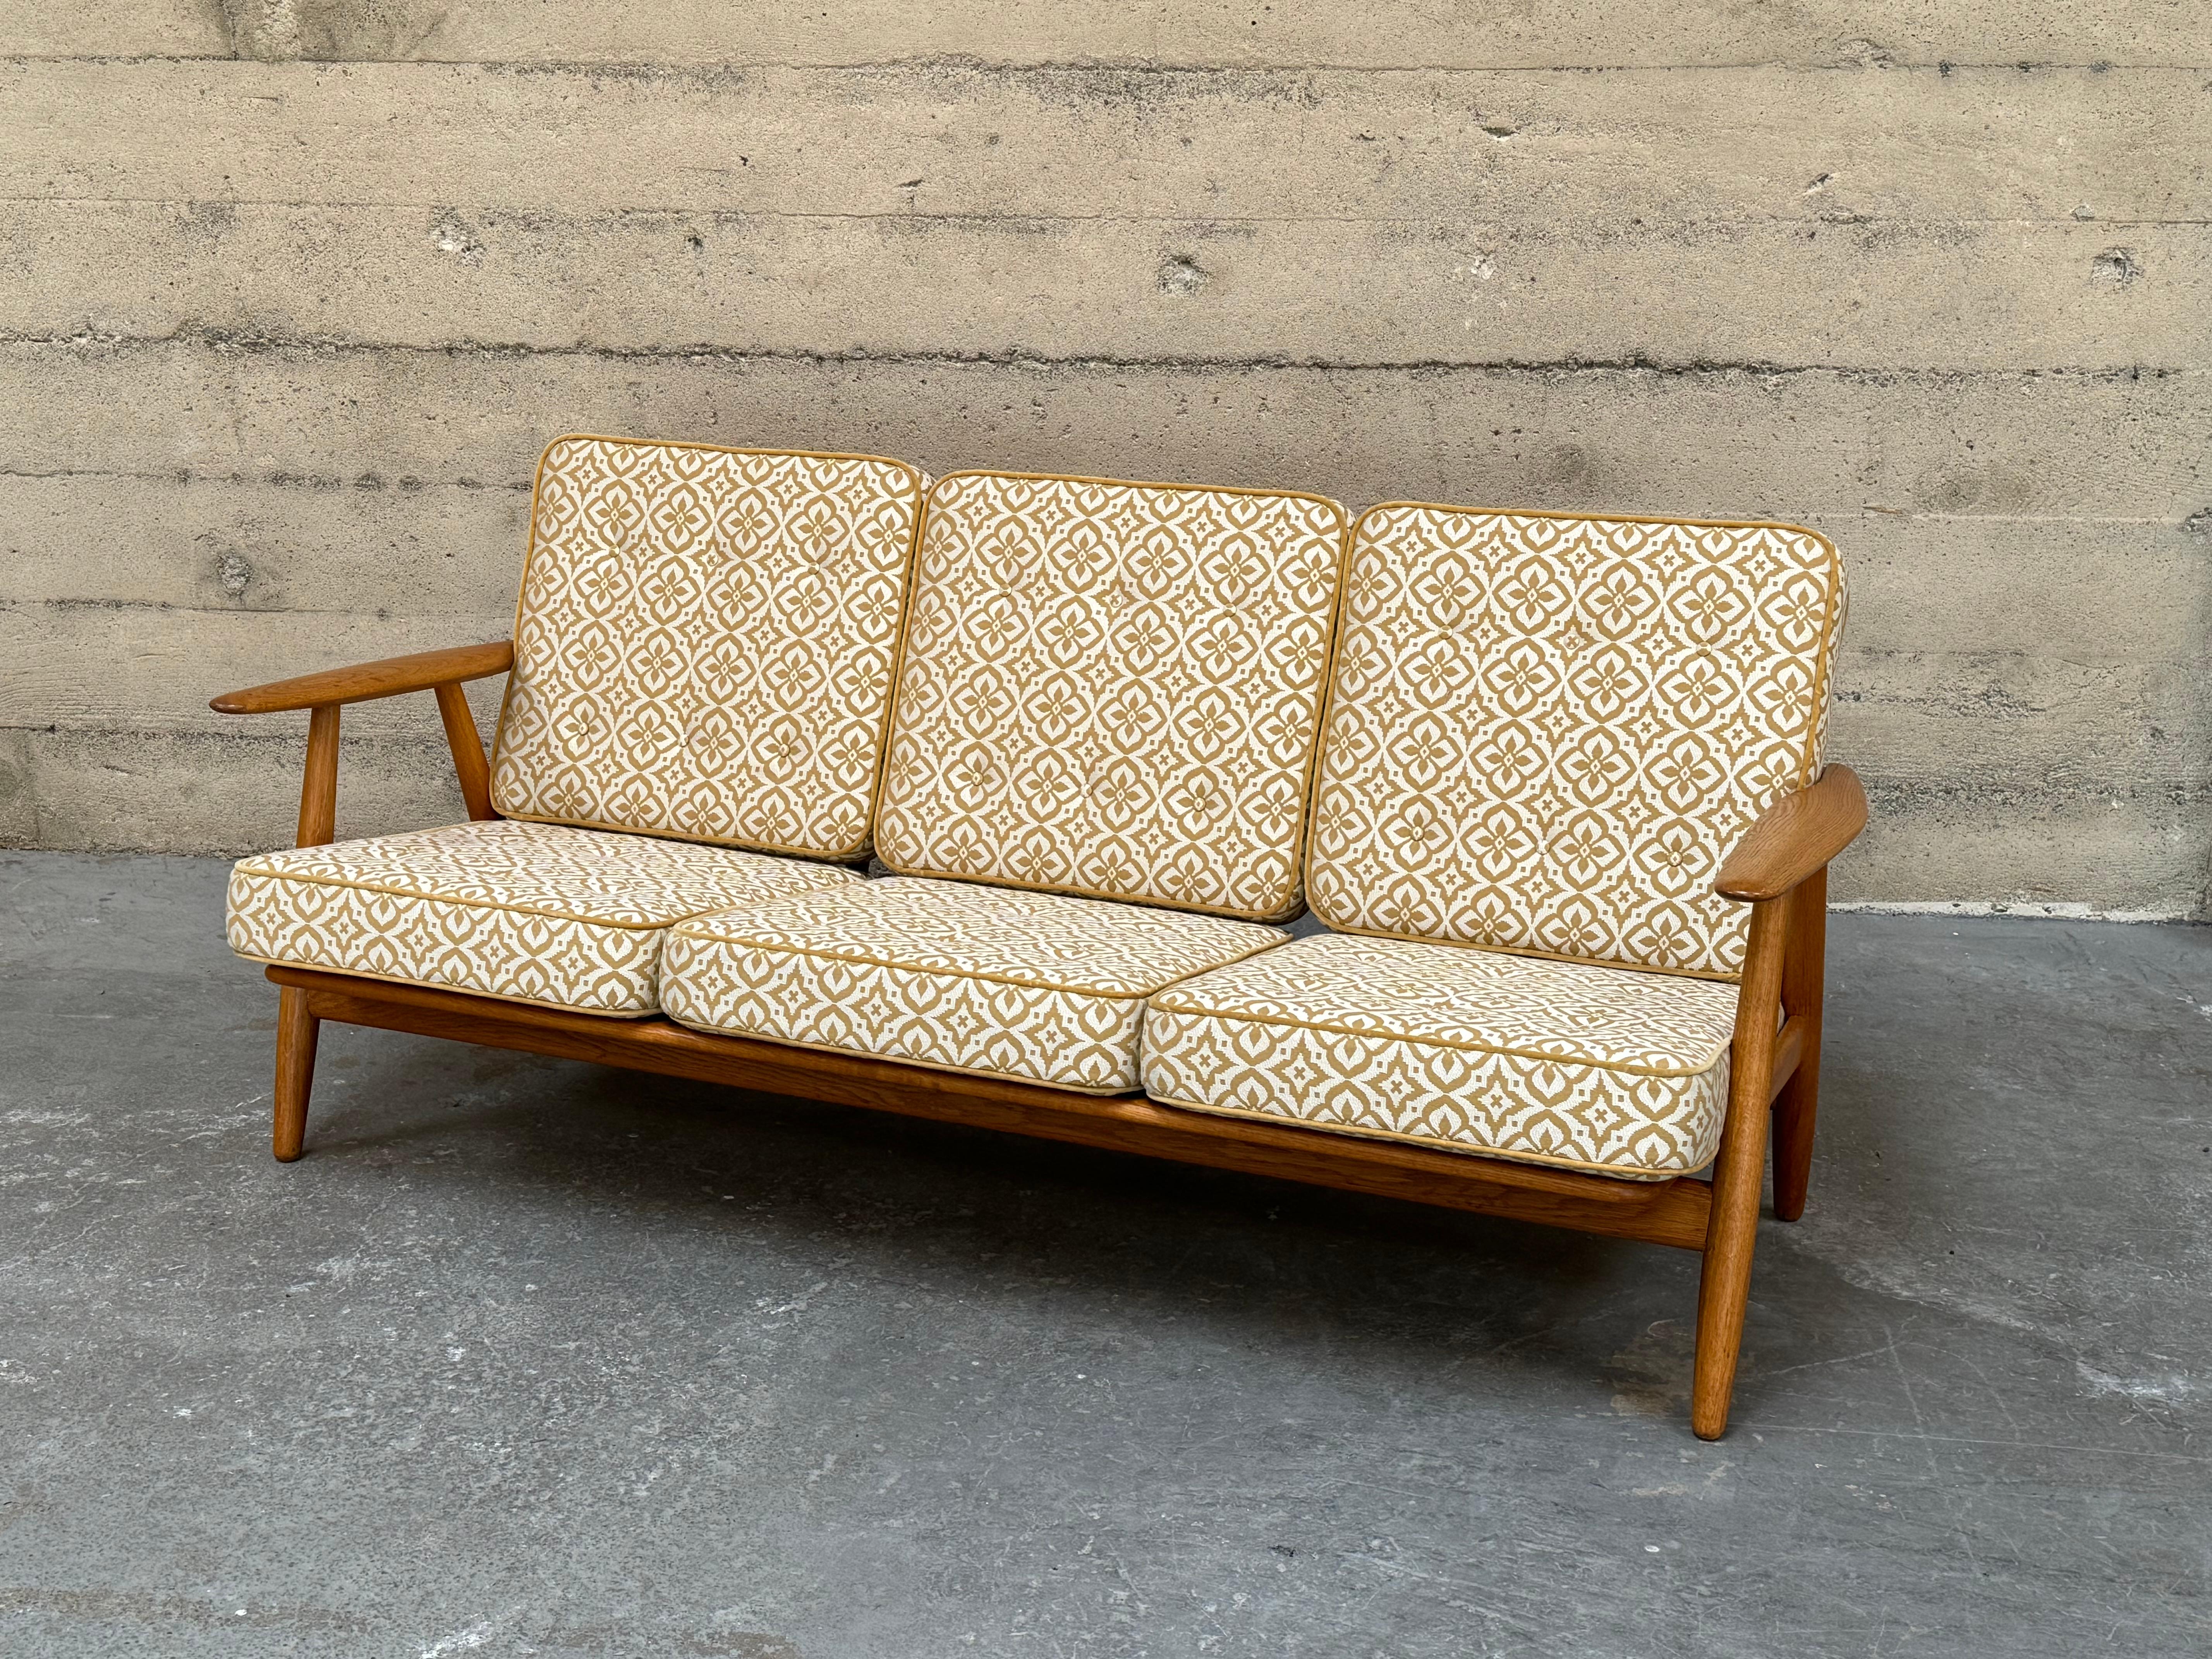 Classic Cigar sofa designed by Hans J. Wegner in oak. Reupholstered in a Kvadrat textile with velvet welt. Three seats. Beautiful frame in solid oak with original finish, made in Denmark circa 1960s. This oak framed design by Hans J Wegner has